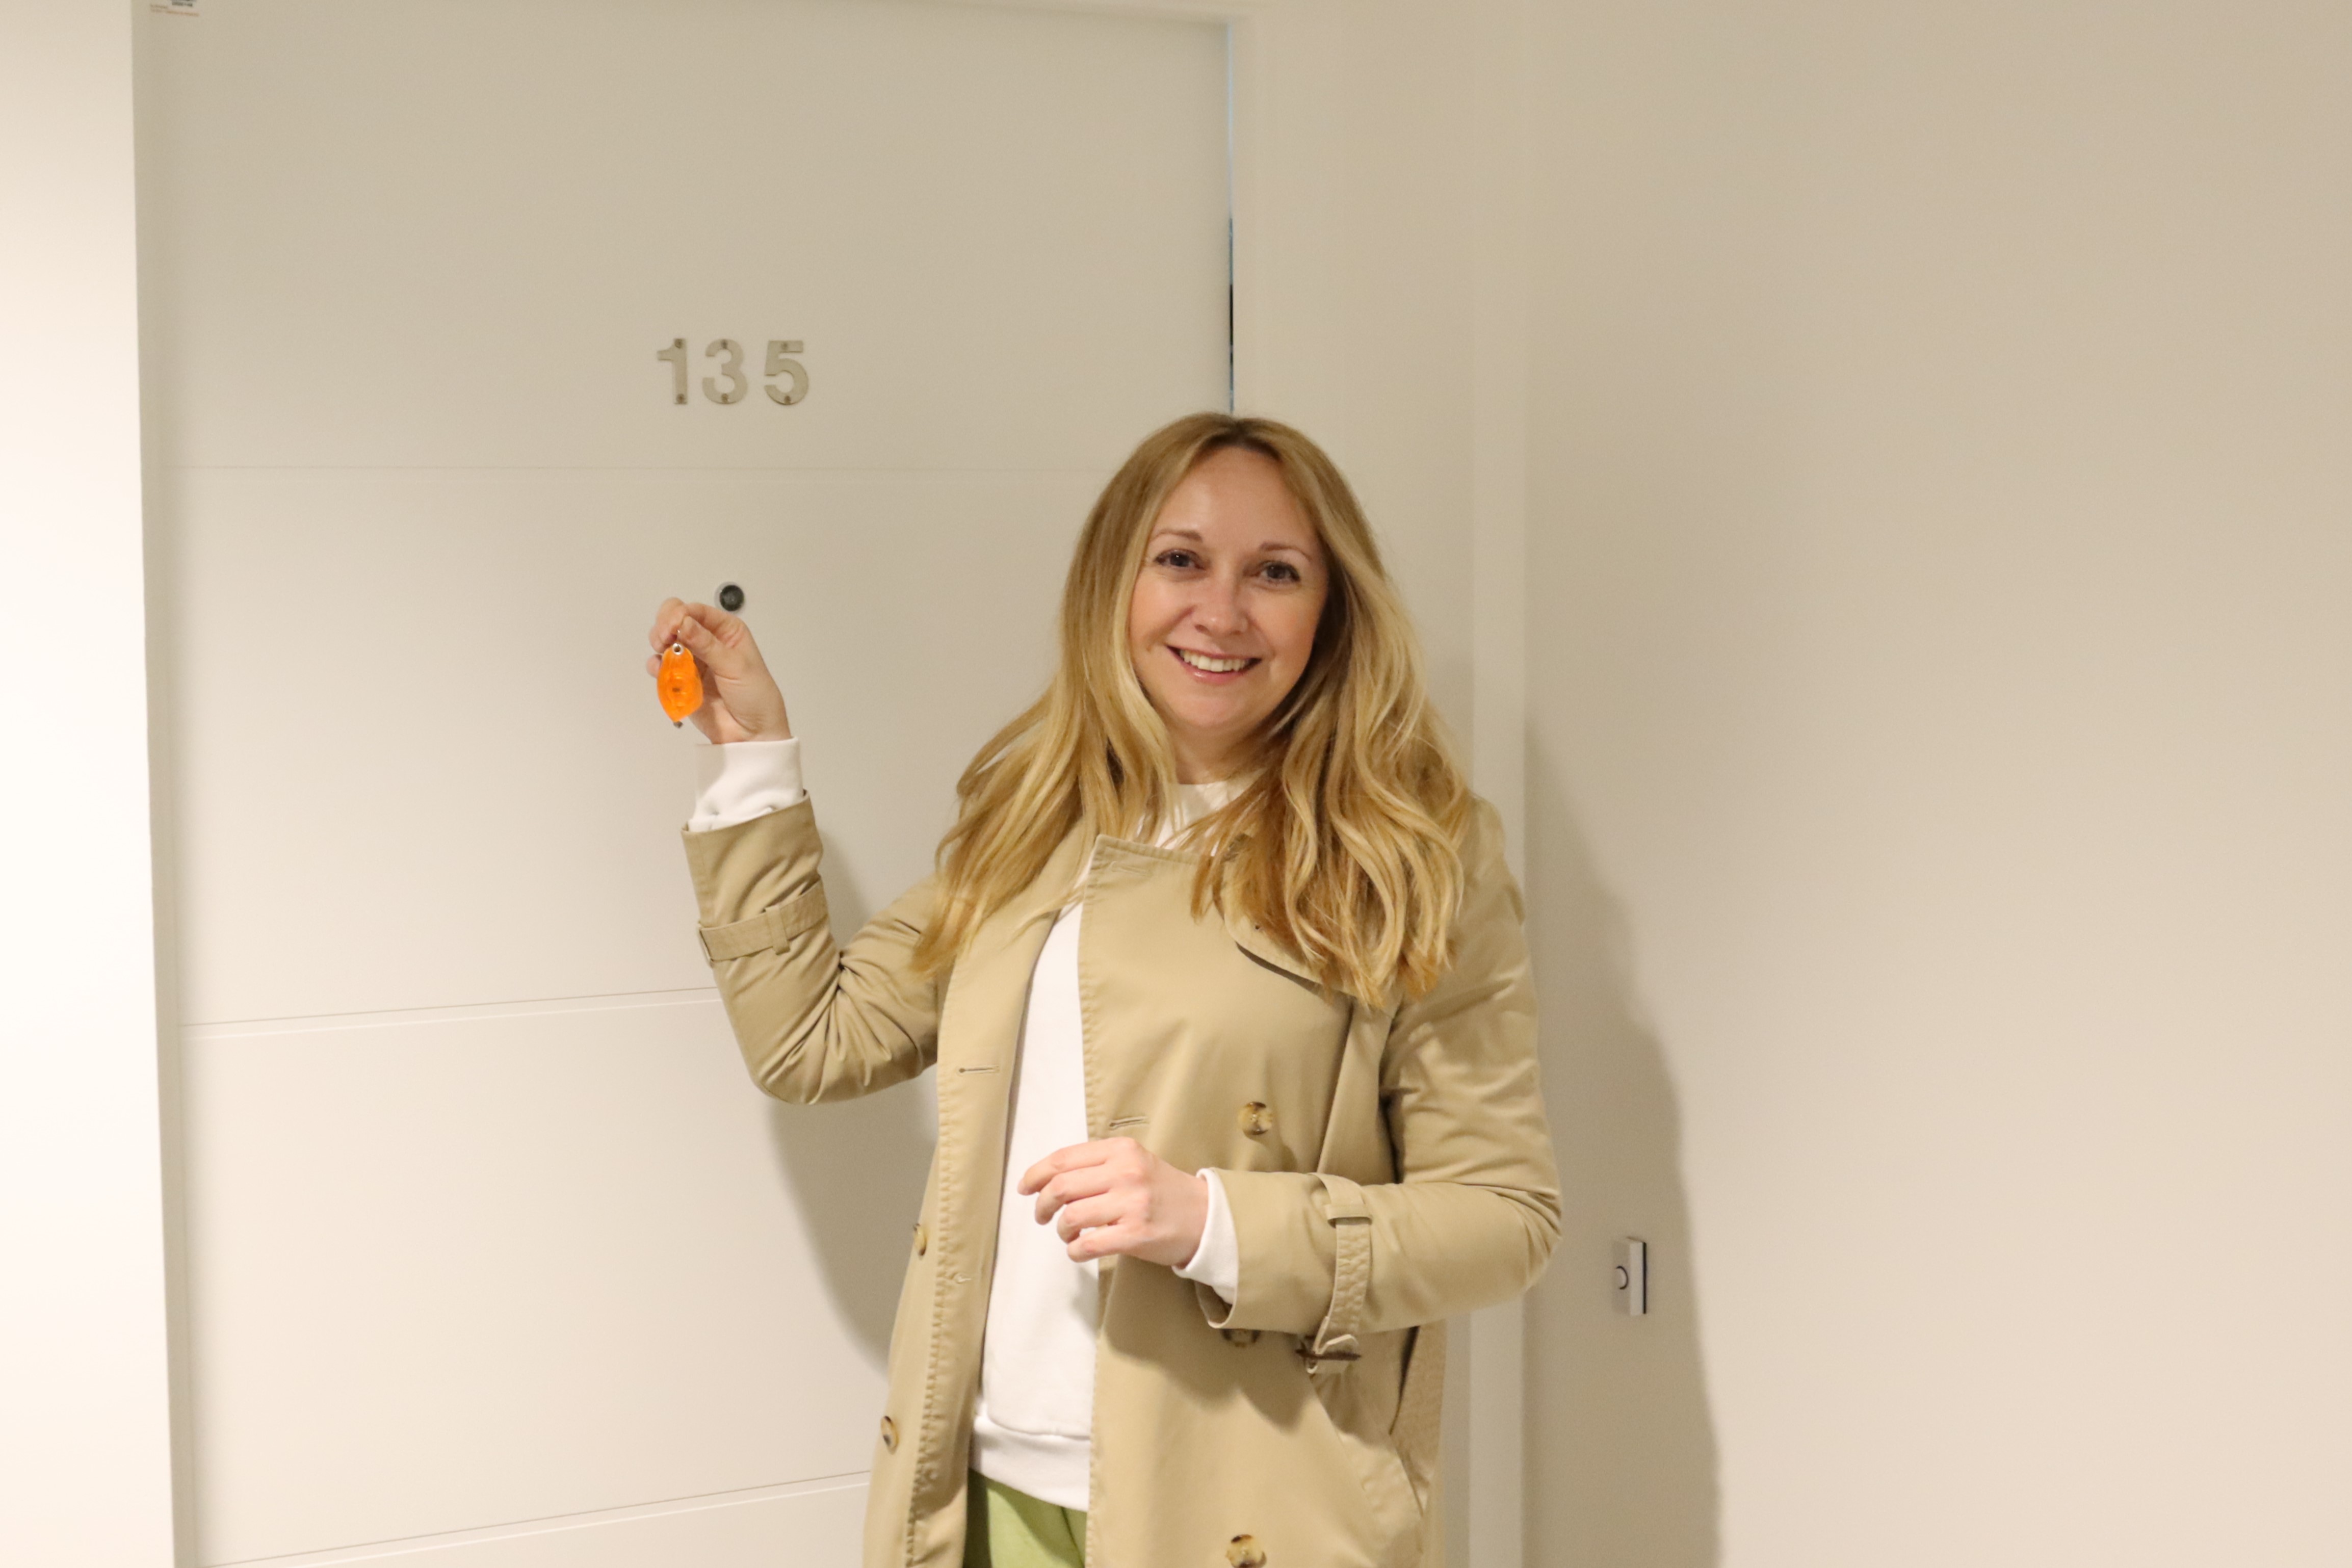 Blonde, white woman smiling in front of a door numbered 135. She is wearing a beige trench coat.